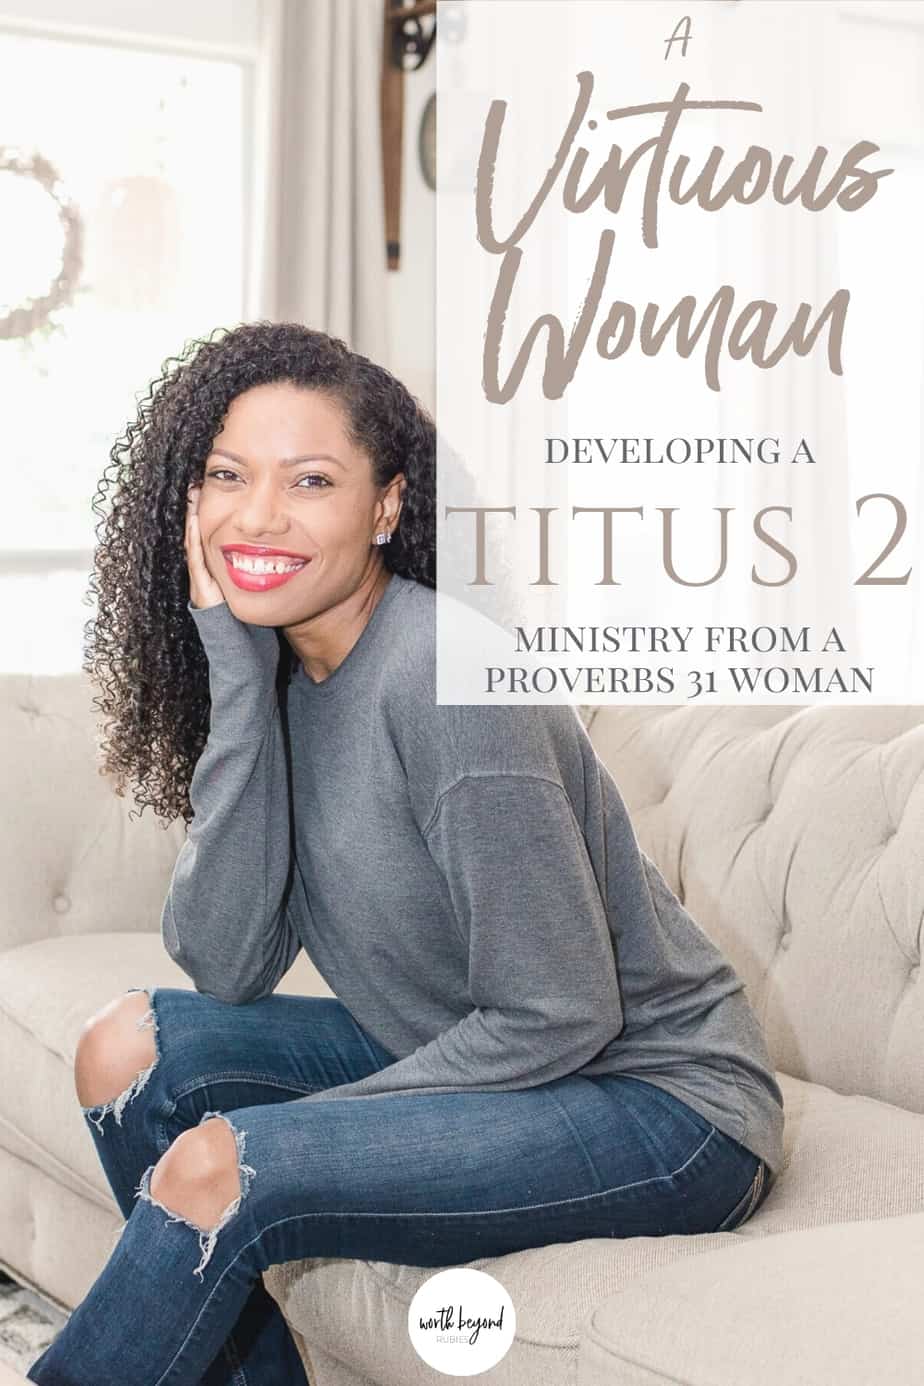 A beautiful black woman sitting on a couch smiling with her hand on her cheek and text that says A Virtuous Woman - Developing a Titus 2 Ministry from a Proverbs 31 Woman